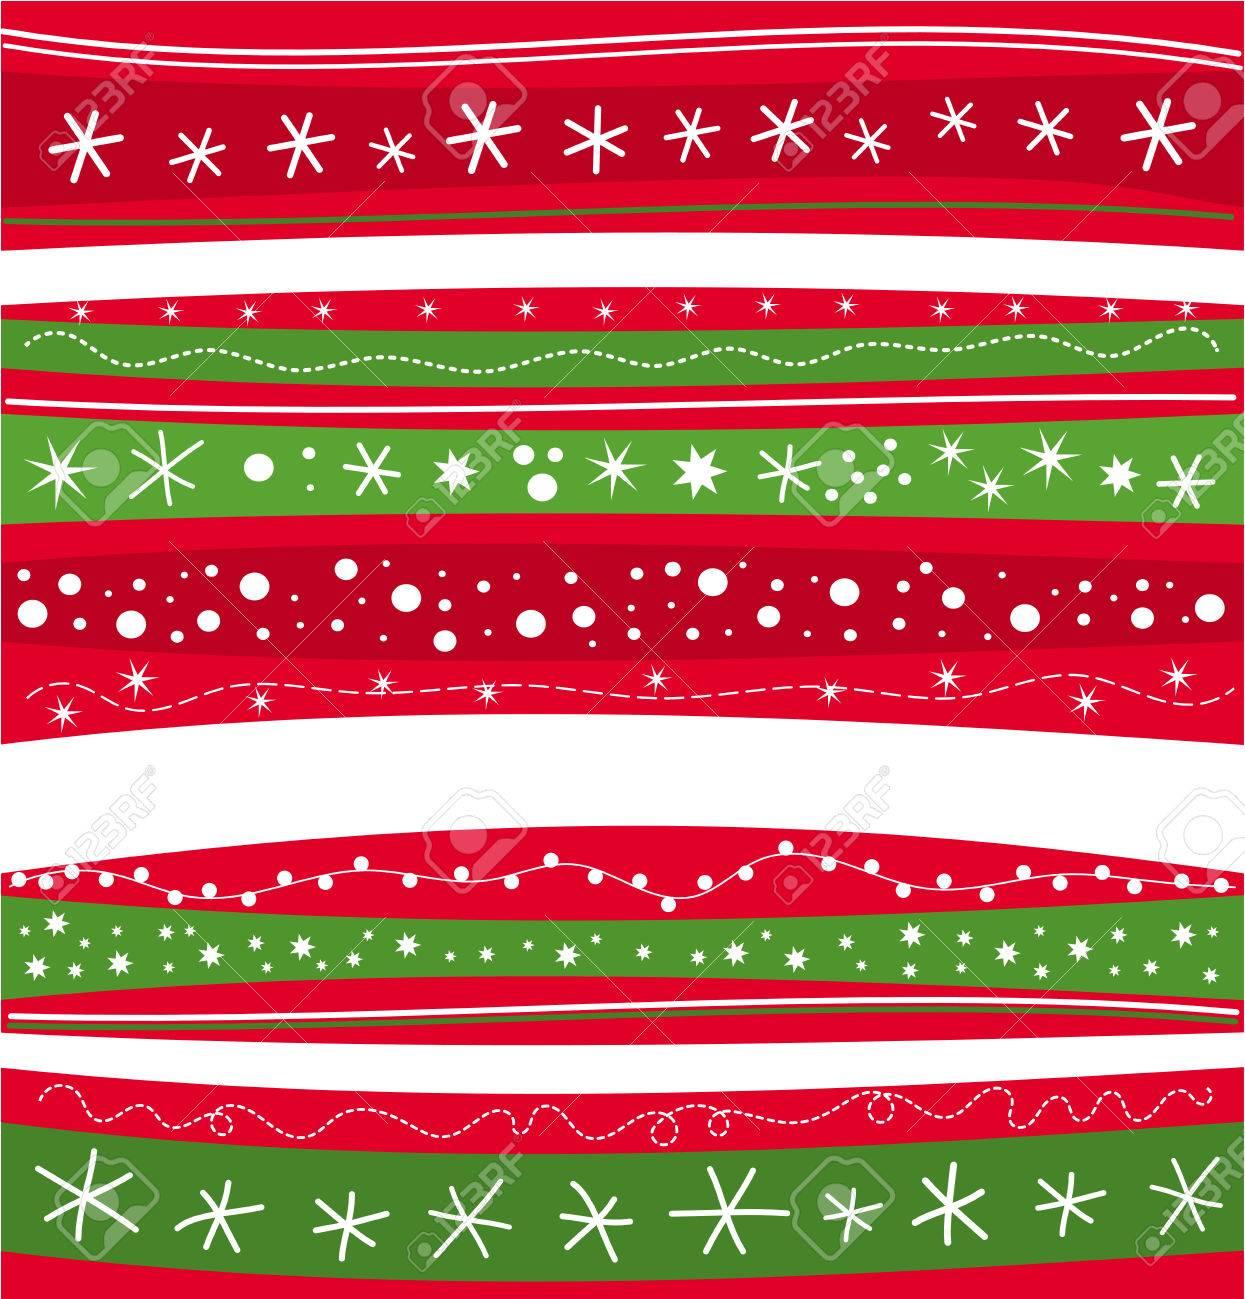 Christmas Winter Red And Green Striped Background Xmas Texture Or